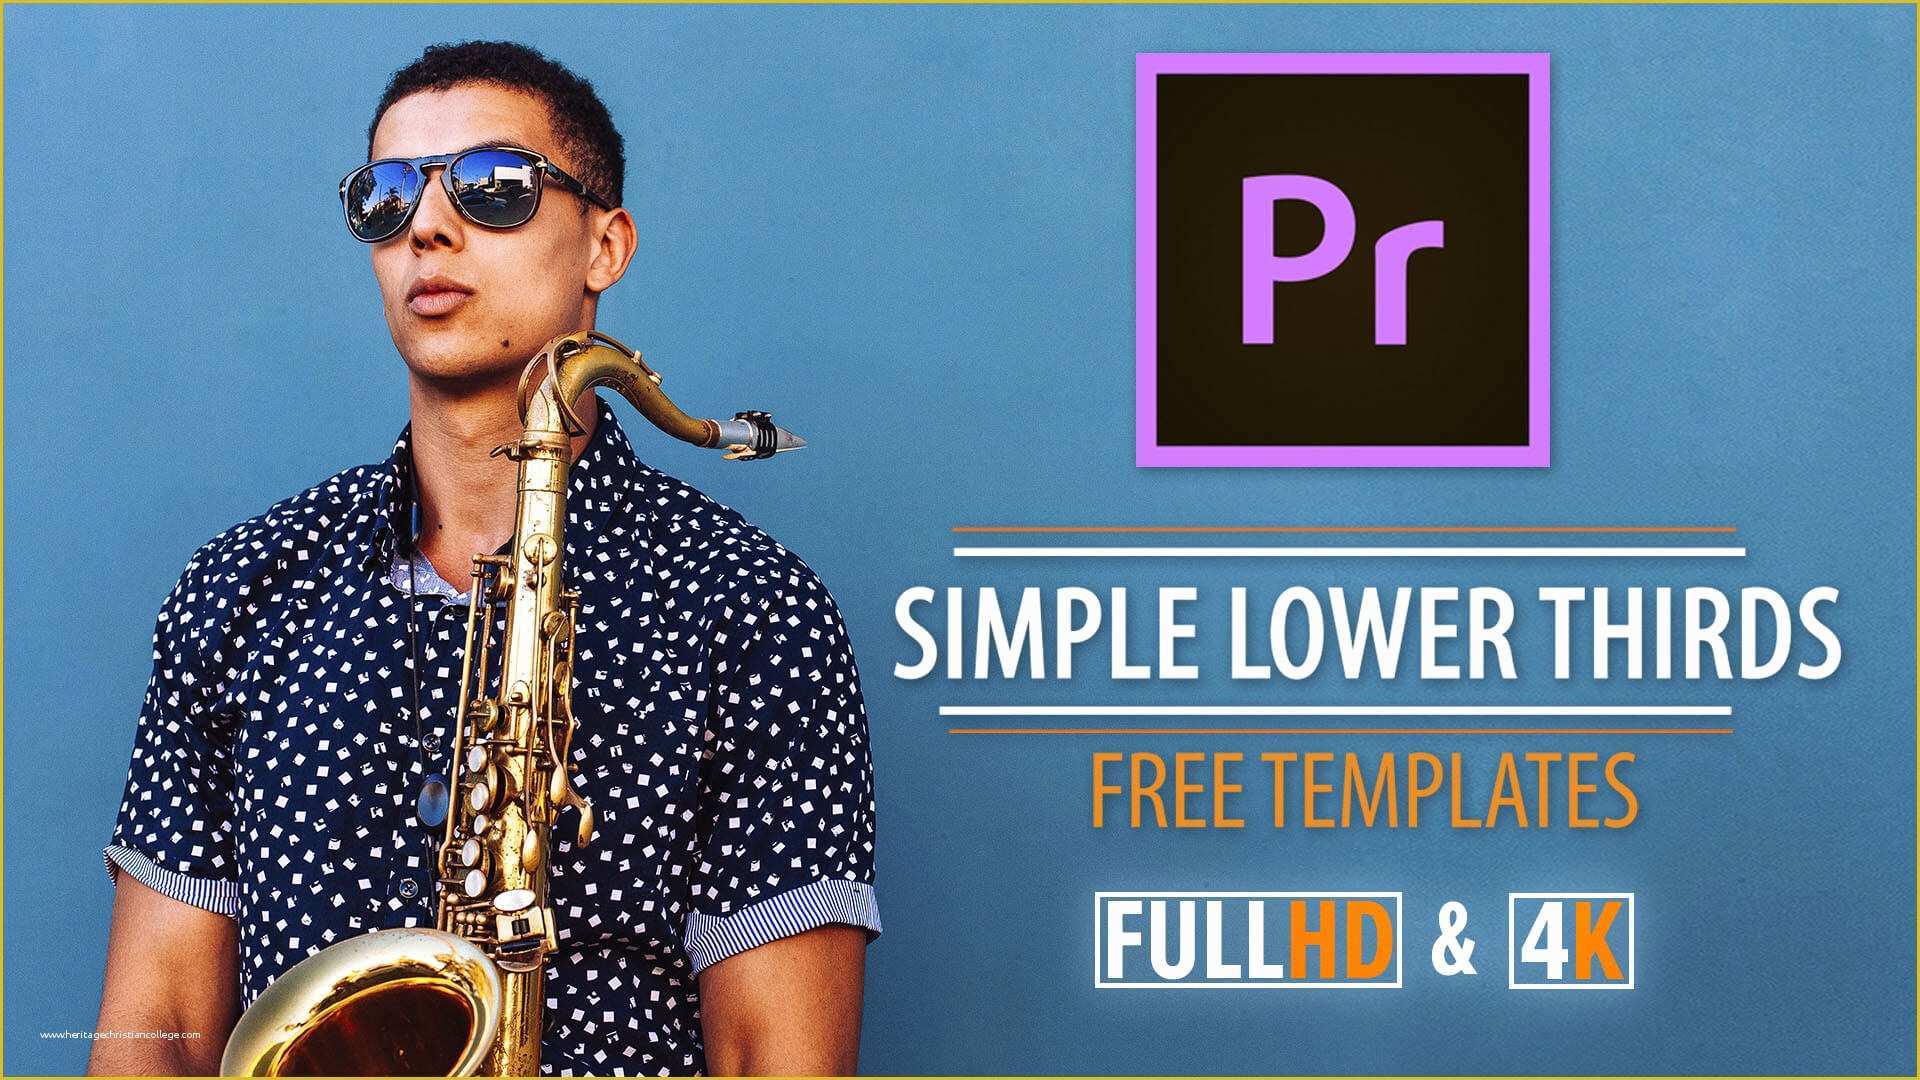 Adobe Premiere Title Templates Free Of Simple Lower Thirds Templates for Premiere Pro